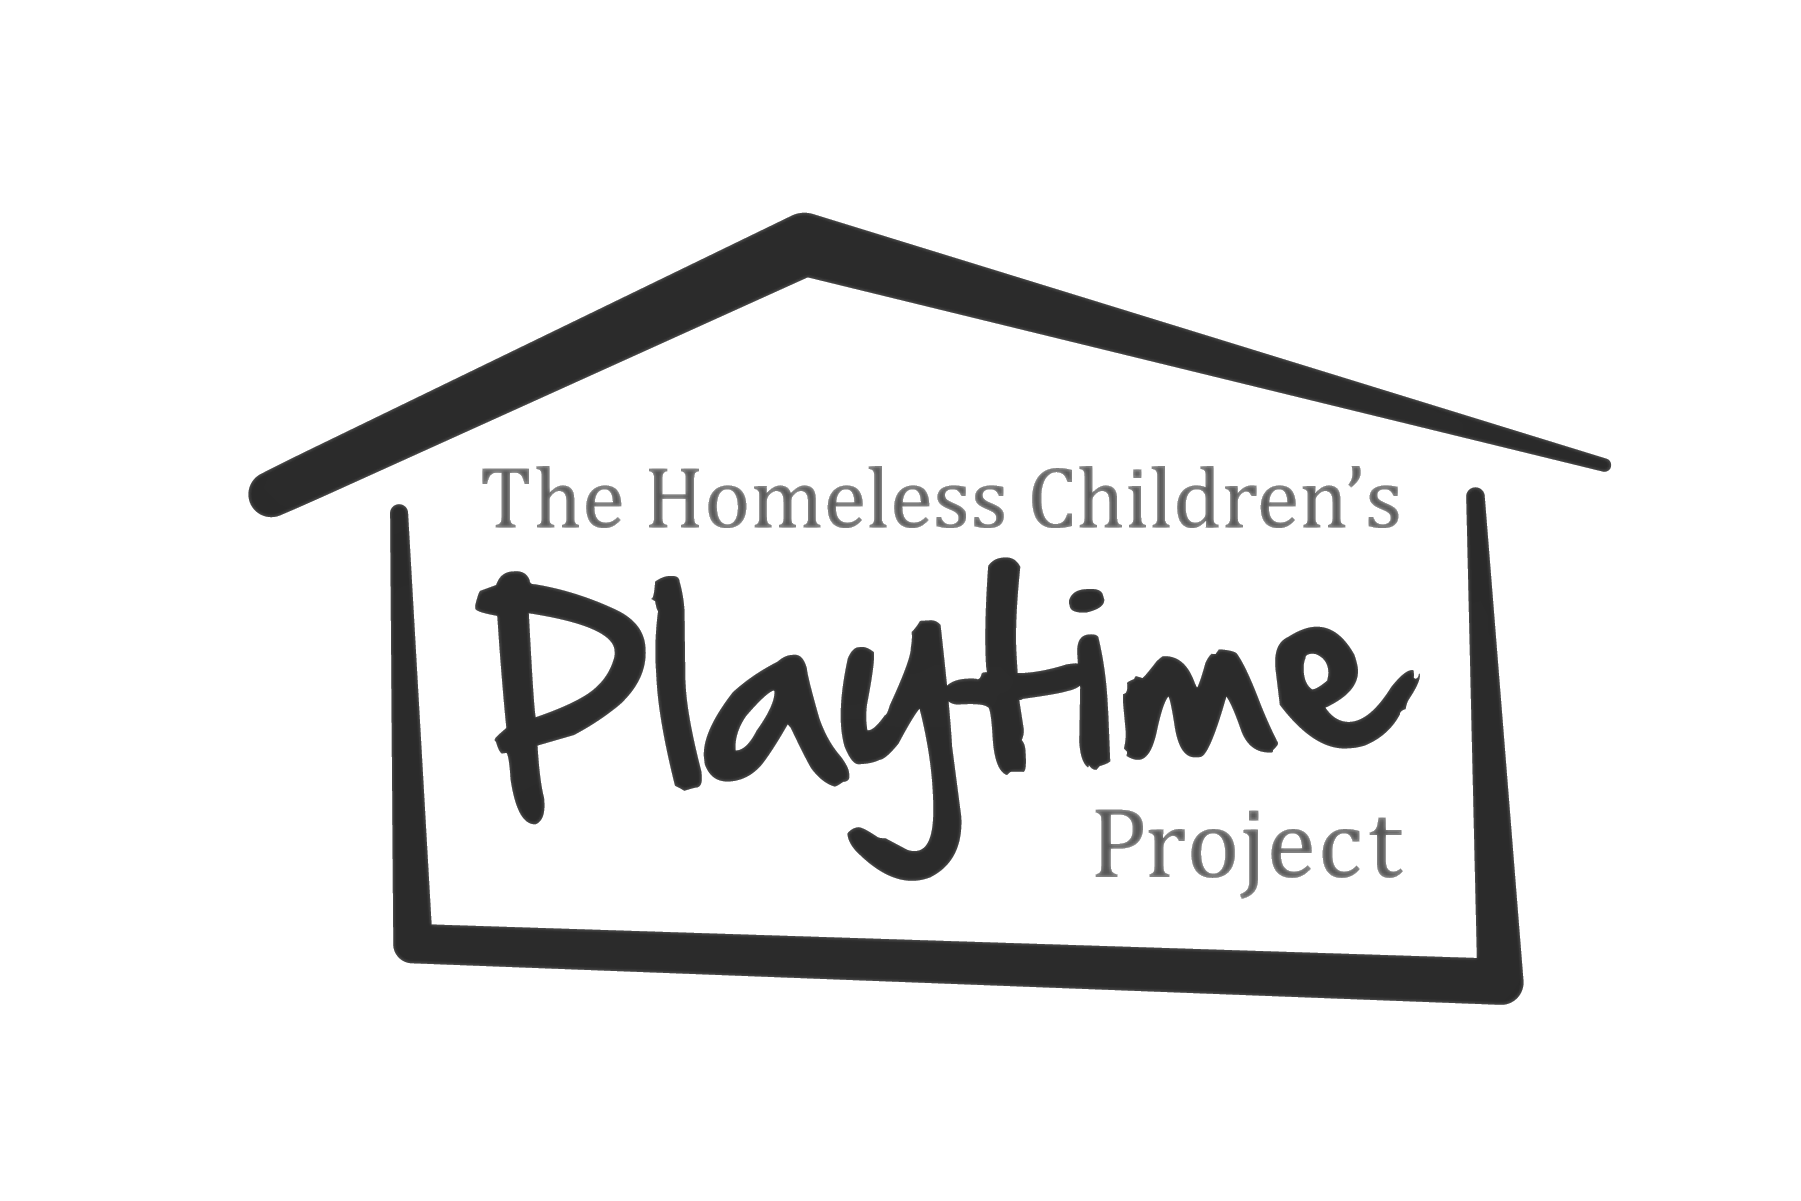 Homeless Children’s Playtime Project: Giving the